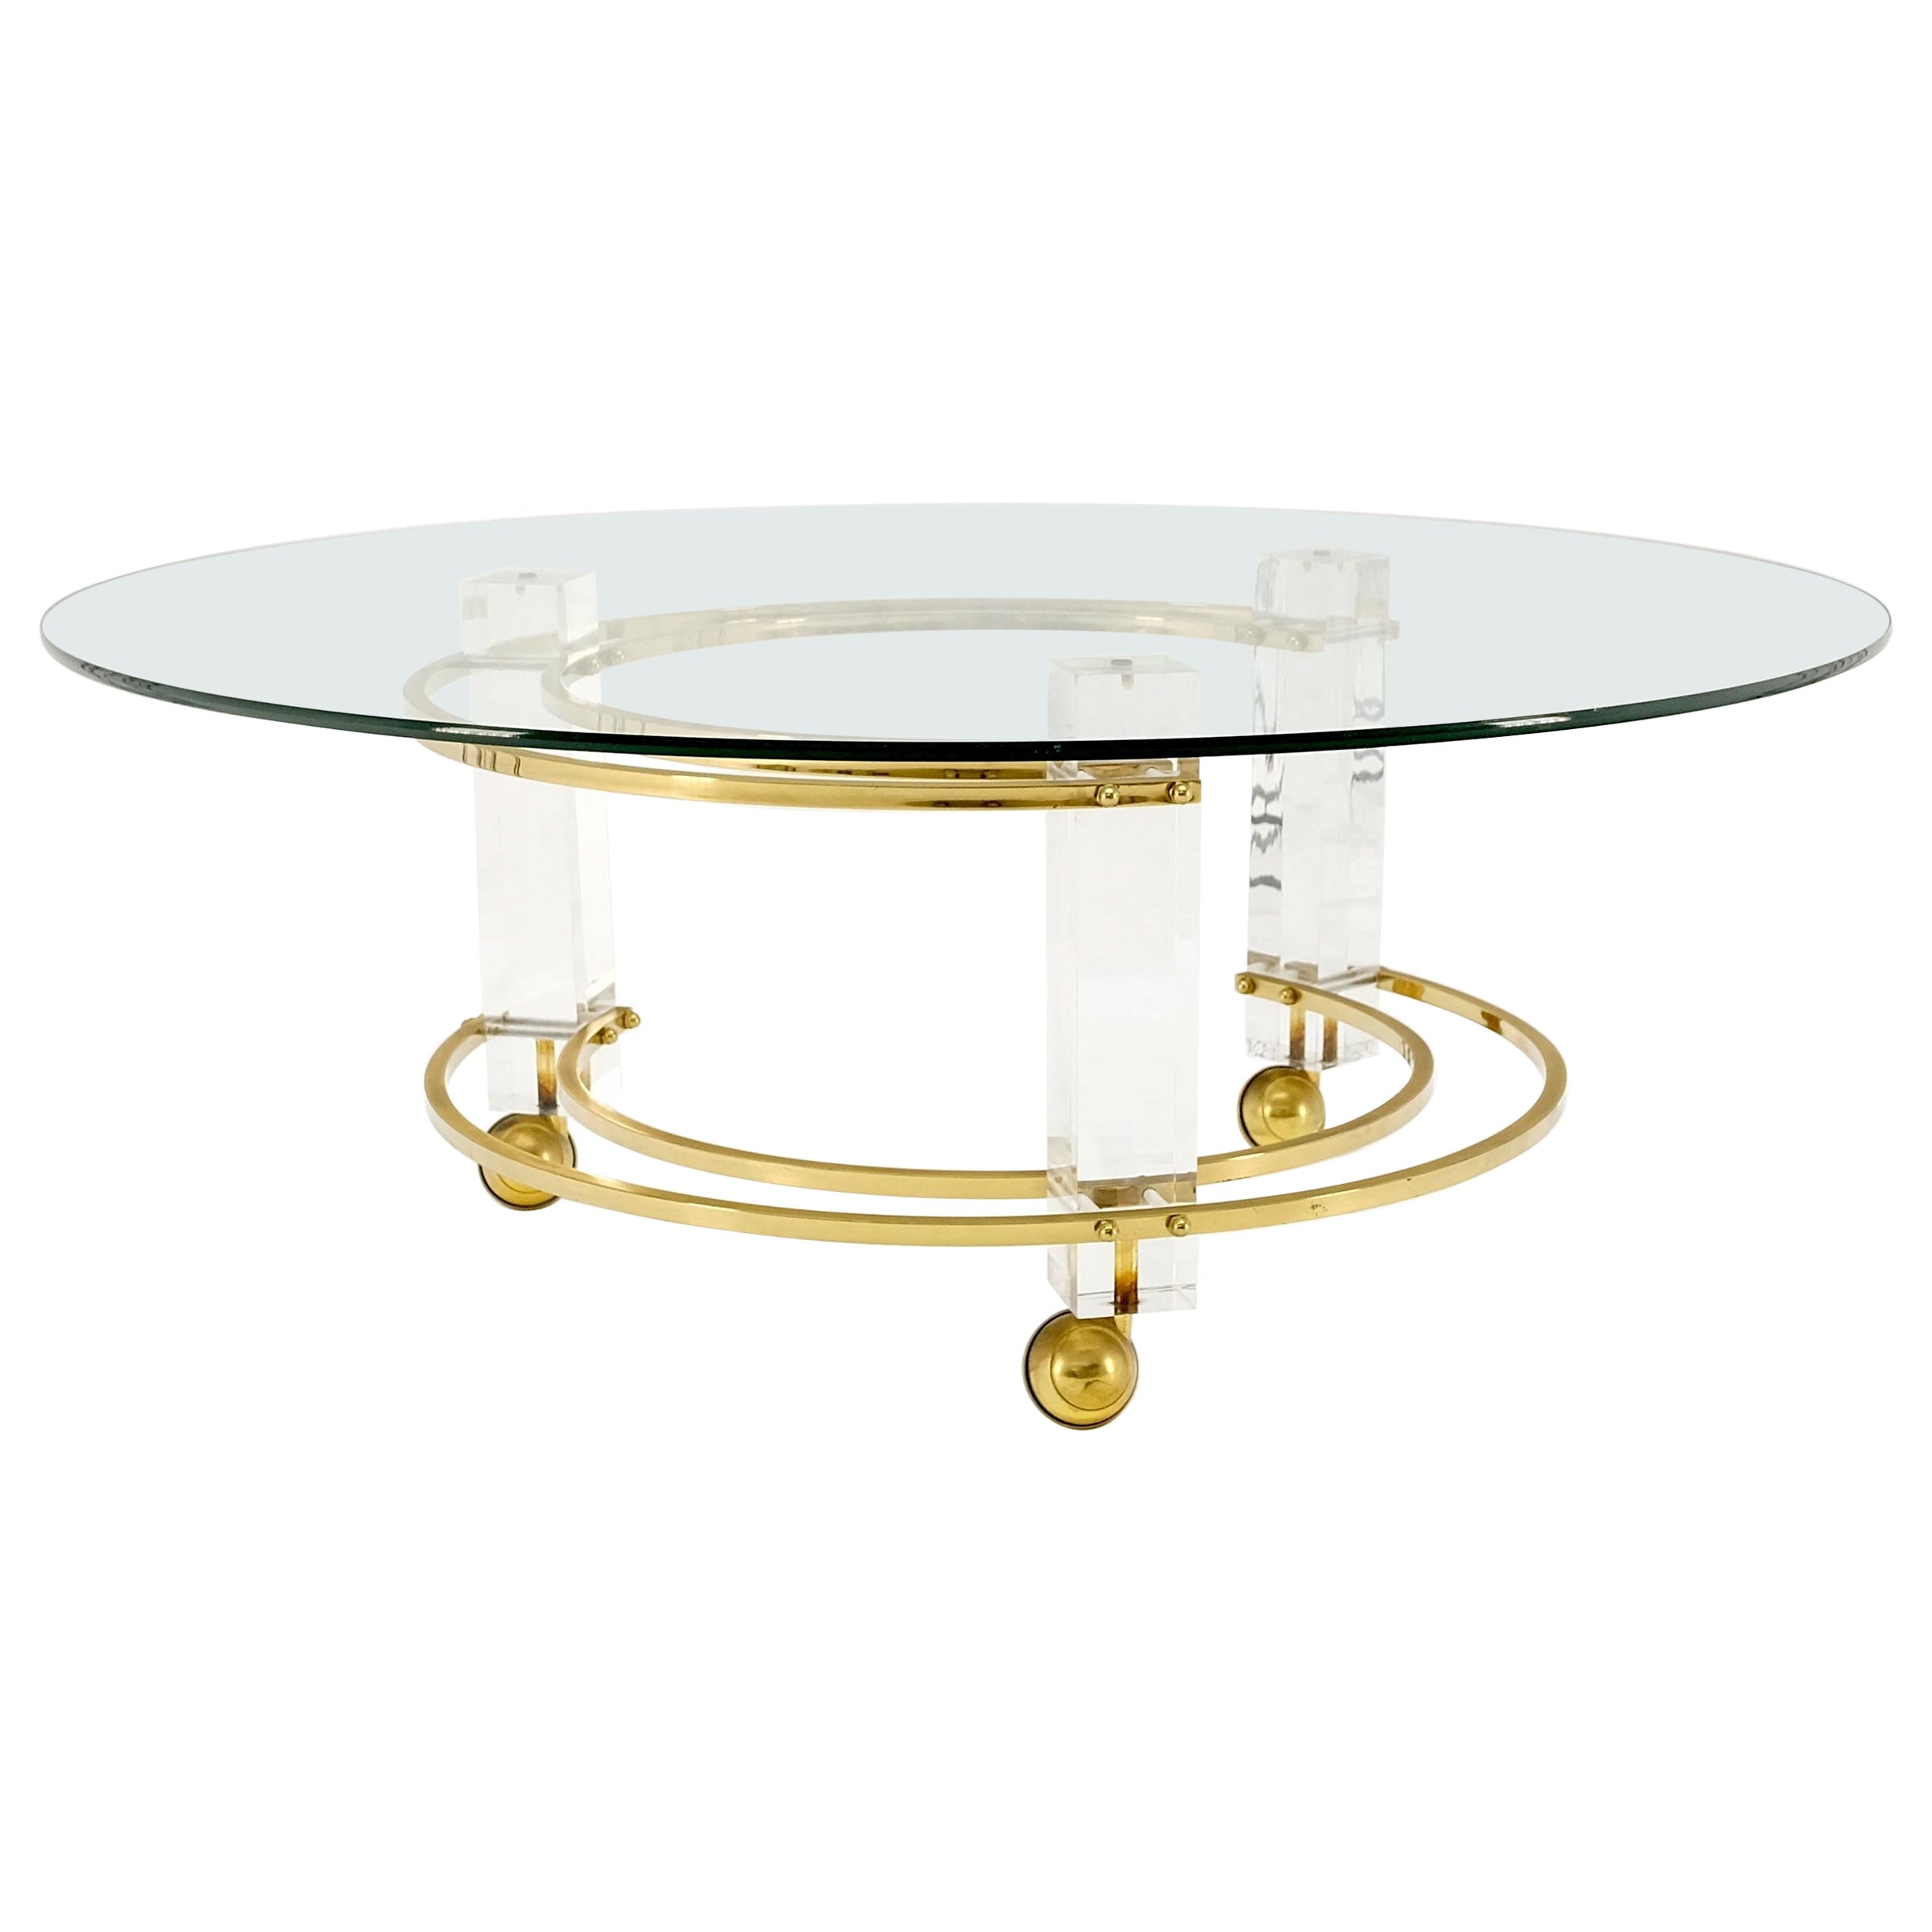 Polished Brass & Lucite Base Round Midcentury Coffee Table on Wheels Mint! For Sale